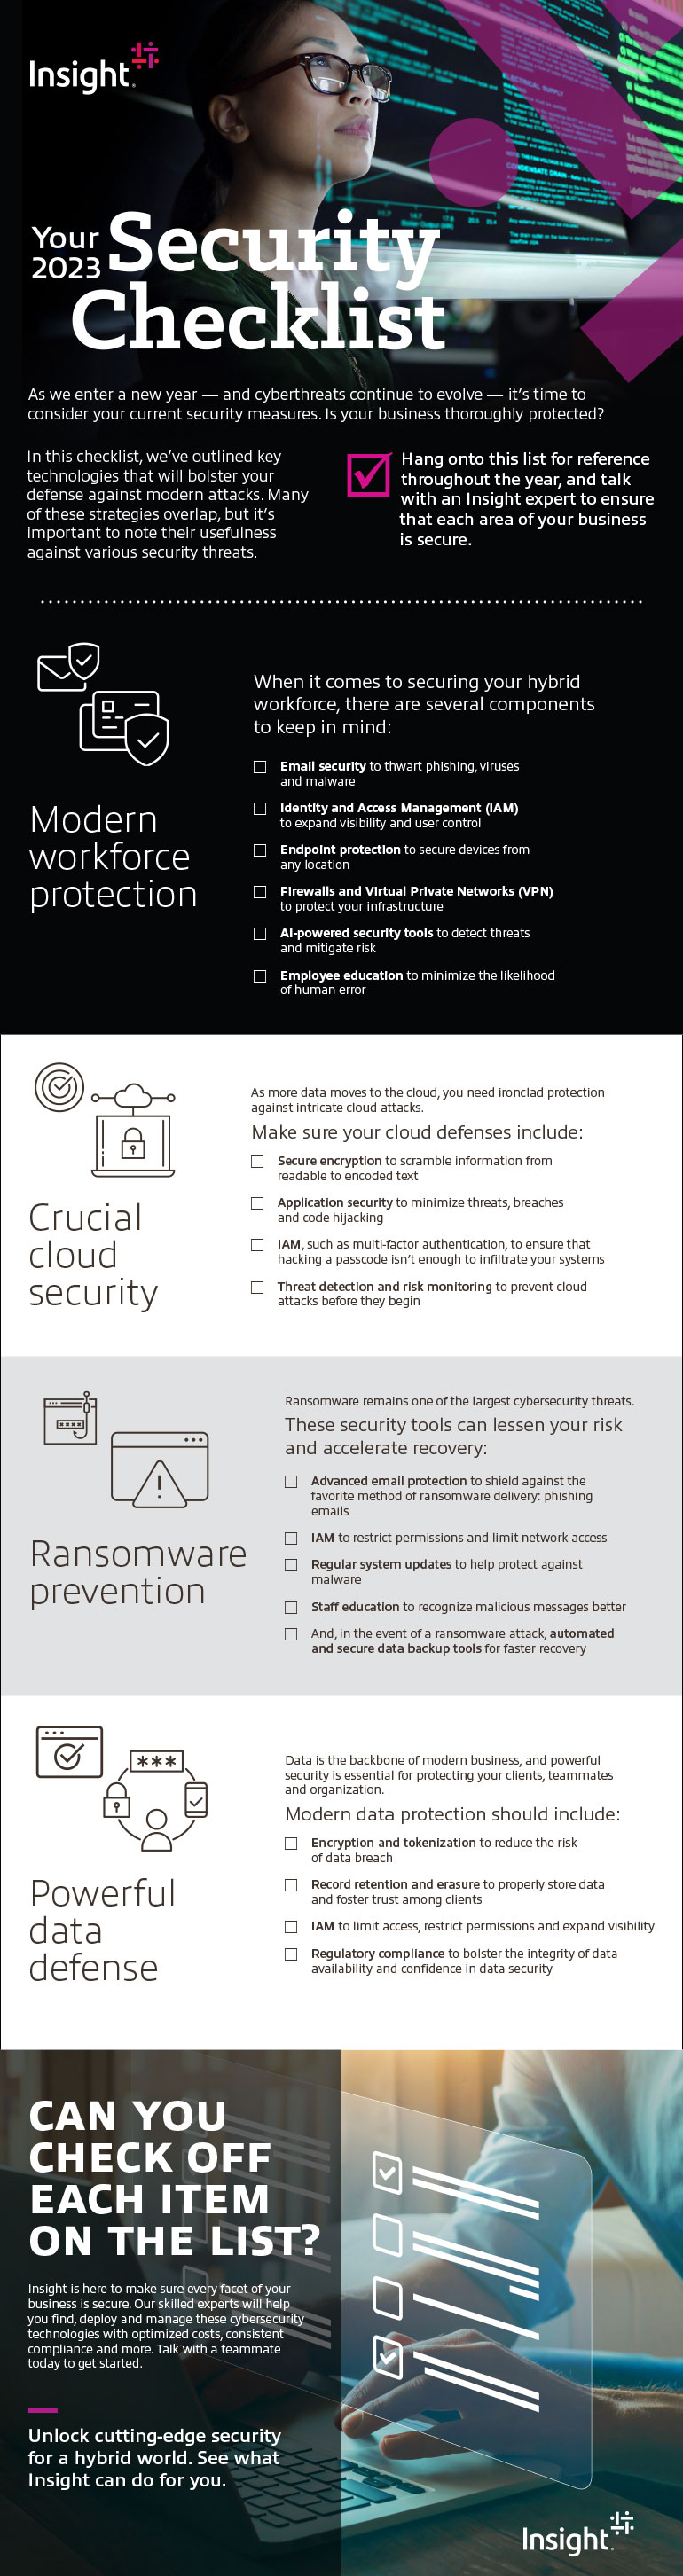 Security checklist infographic as transcribed below.